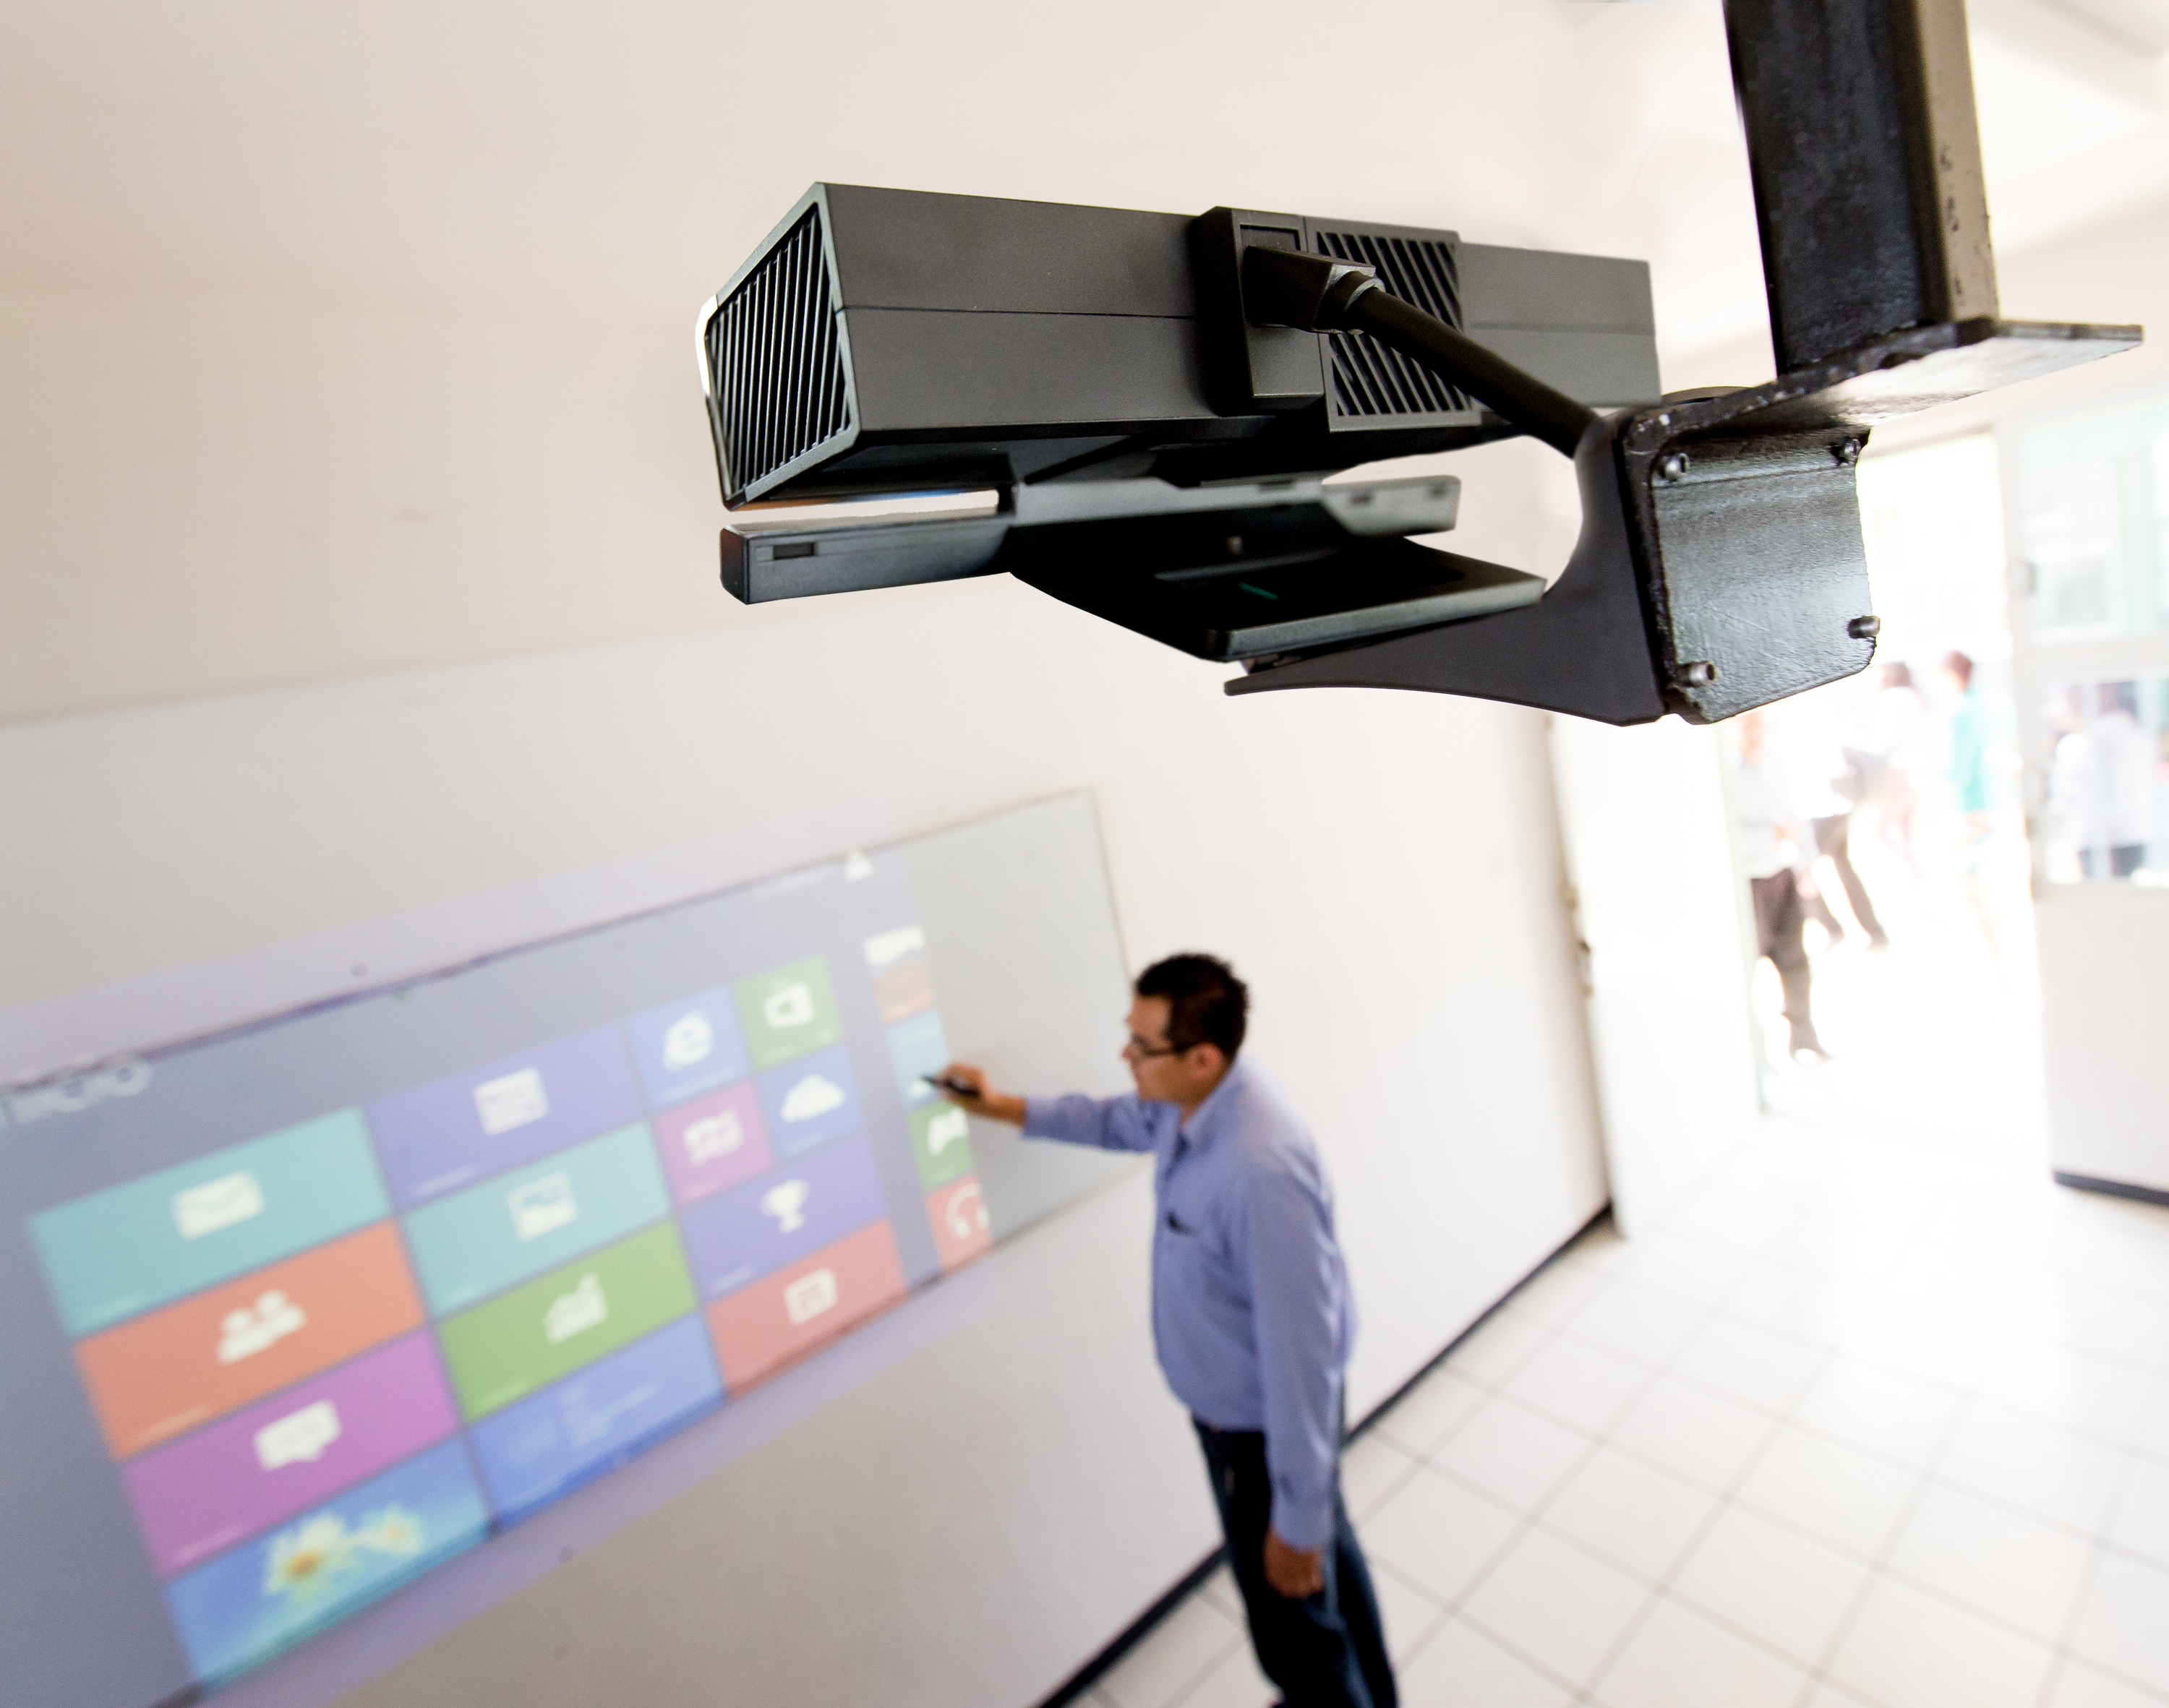 Microsoft releases Kinect SDK 2.0 and new adapter kit - The Official  Microsoft Blog